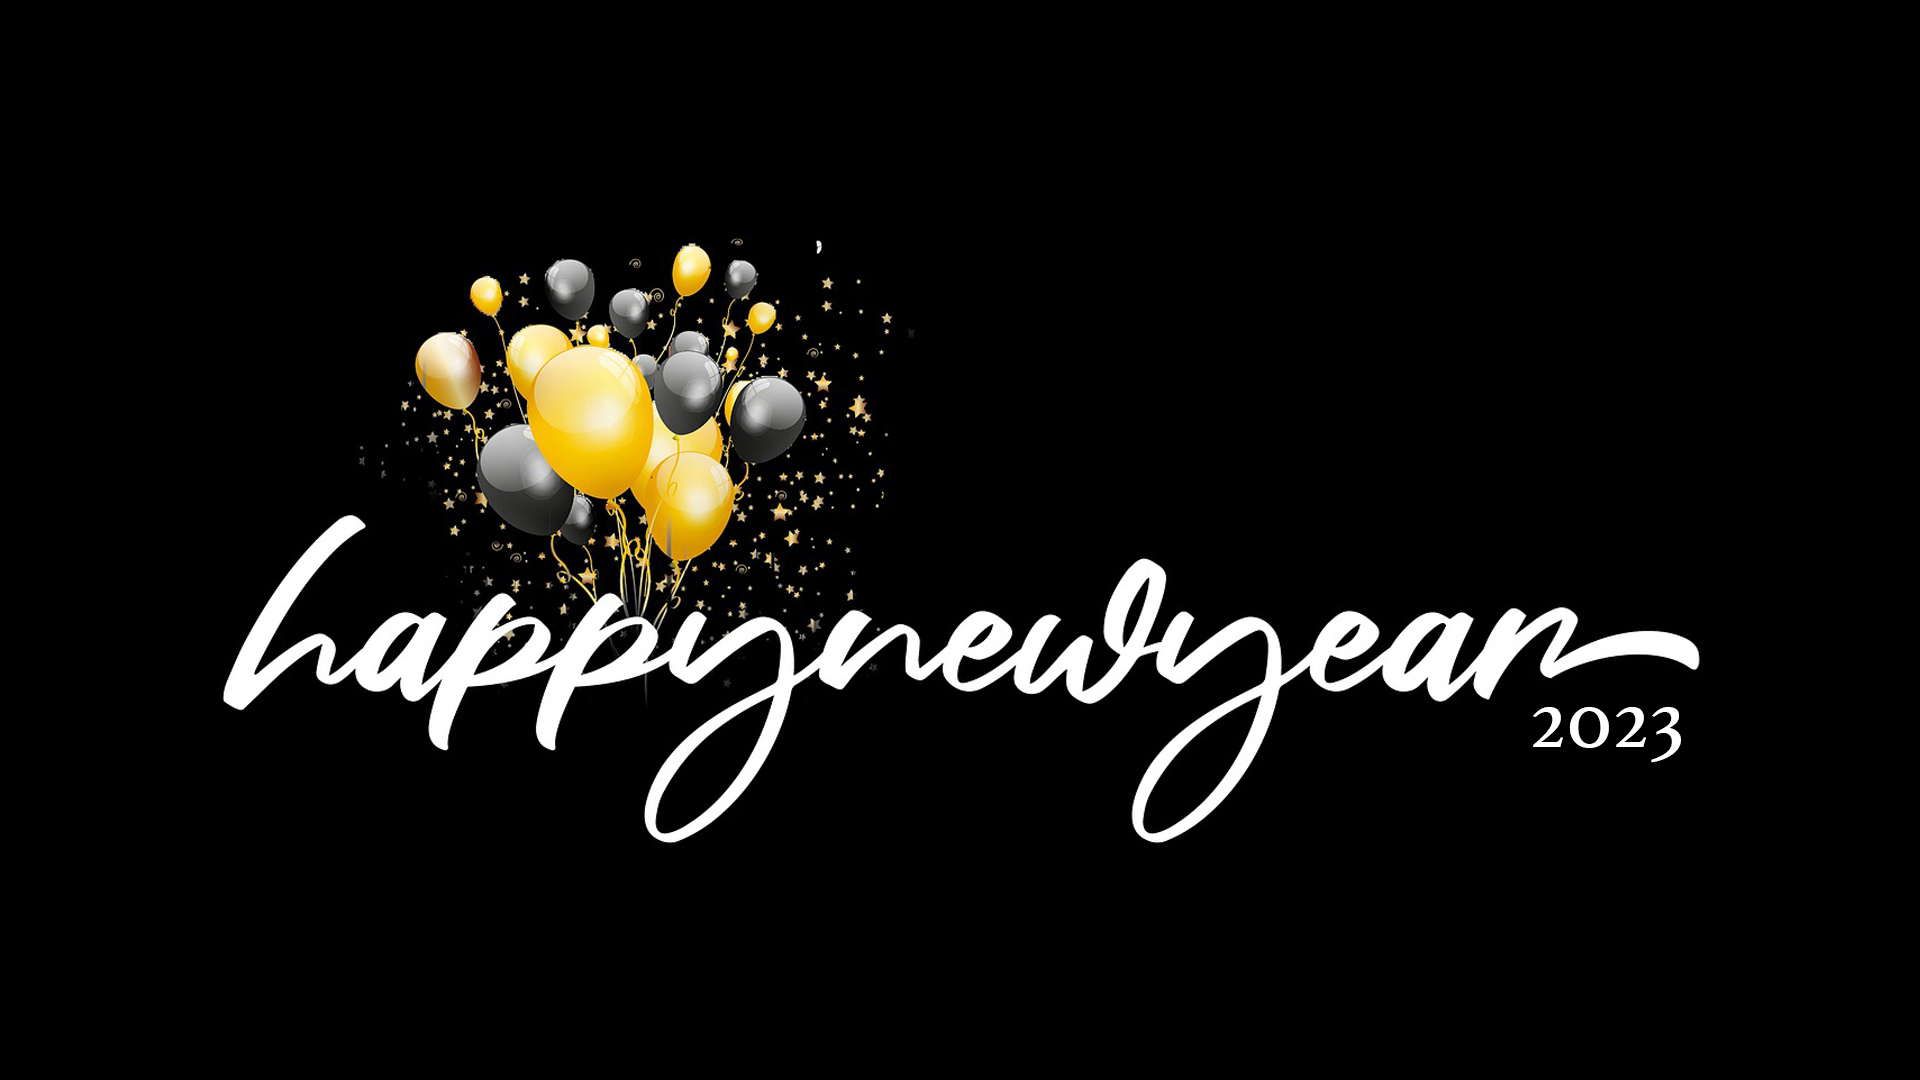 Black background with a cursive white Happy New Year text spanning out across the image. black and gold balloons with gold confetti rising up from the 'p' in happy.